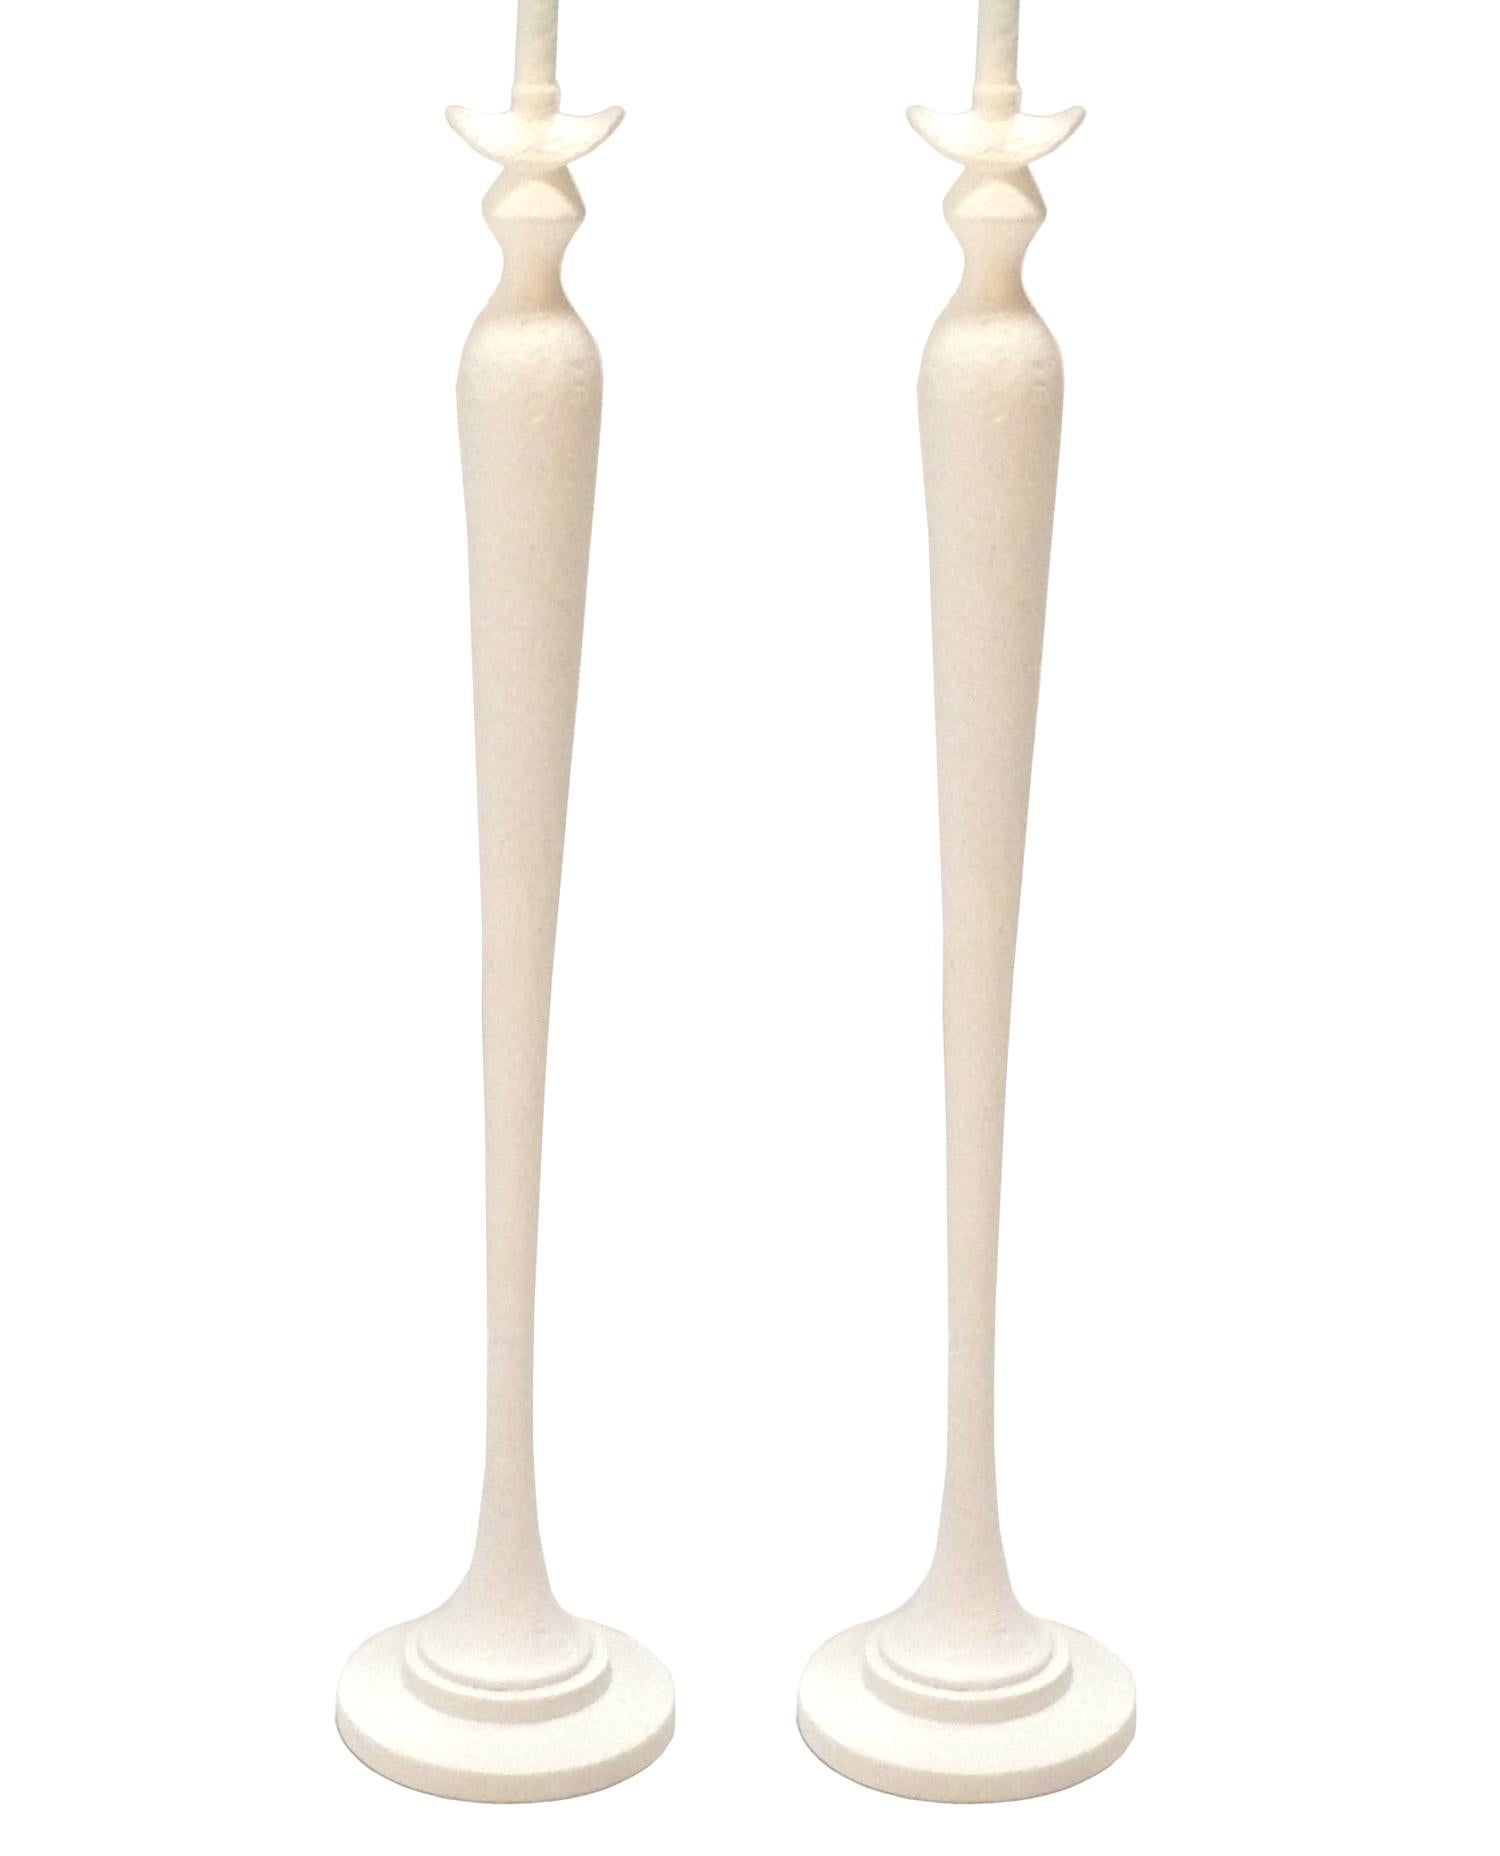 Pair of sculptural floor lamps, in the manner of Diego Giacometti, called the Firenze Model, by Baker Furniture, American, circa 2000s. They are constructed of a faux plaster and are a nice quality, like all Baker products. They had an original